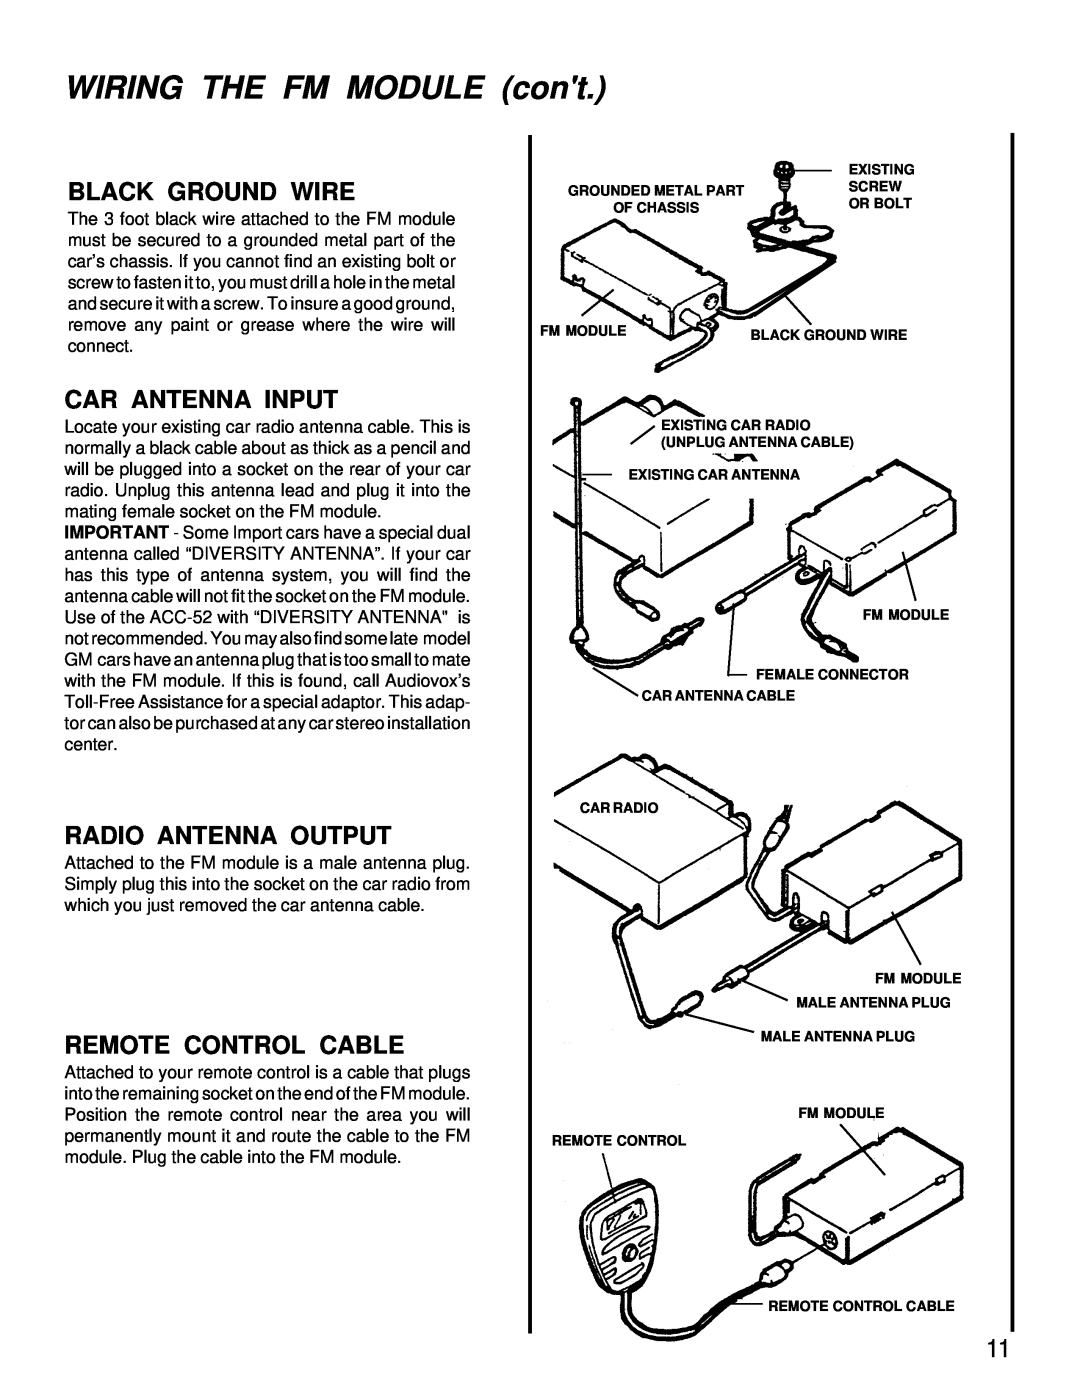 Audiovox ACC-52 owner manual WIRING THE FM MODULE cont, Black Ground Wire, Car Antenna Input, Radio Antenna Output 